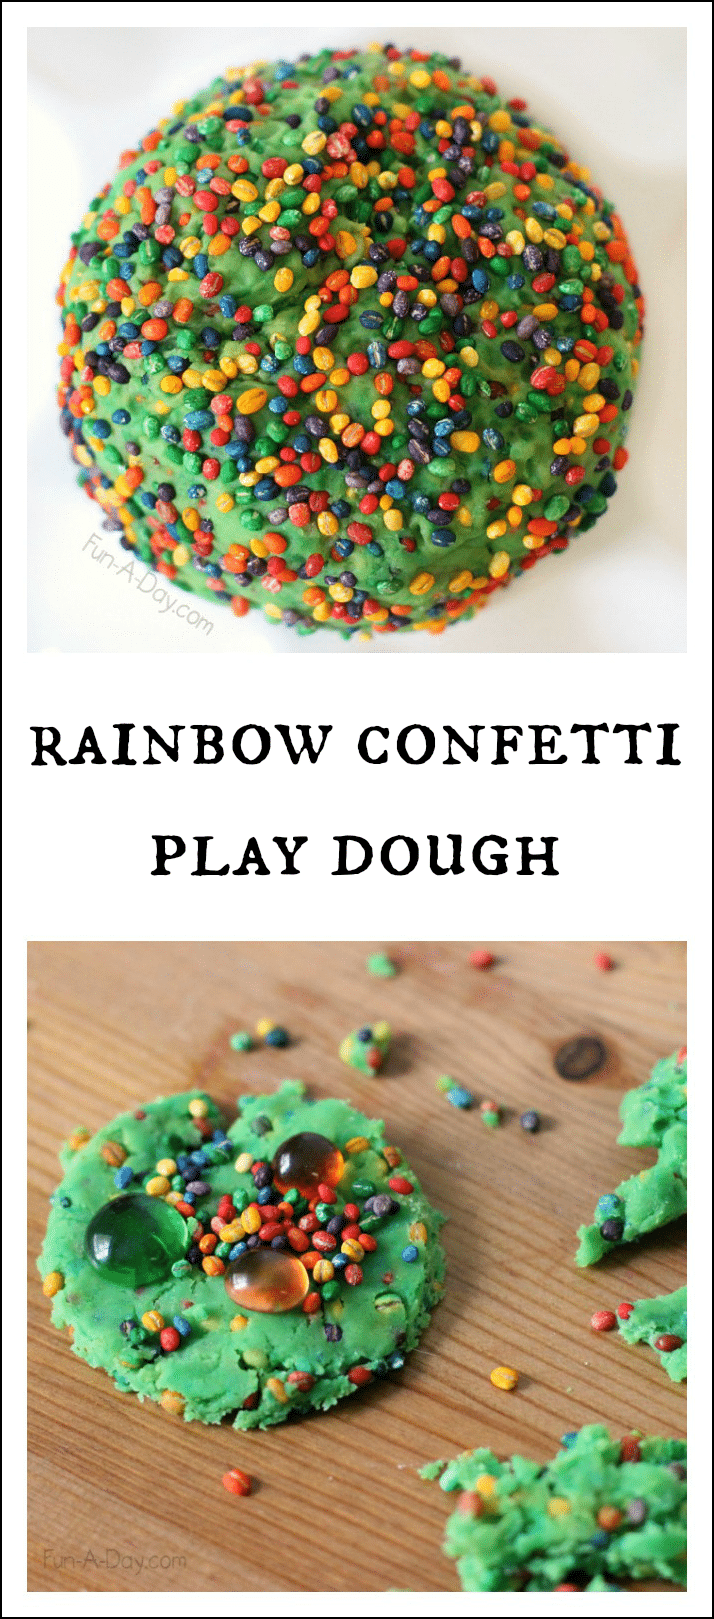 Rainbow confetti play dough - colorful play dough for kids that has a cool texture to it